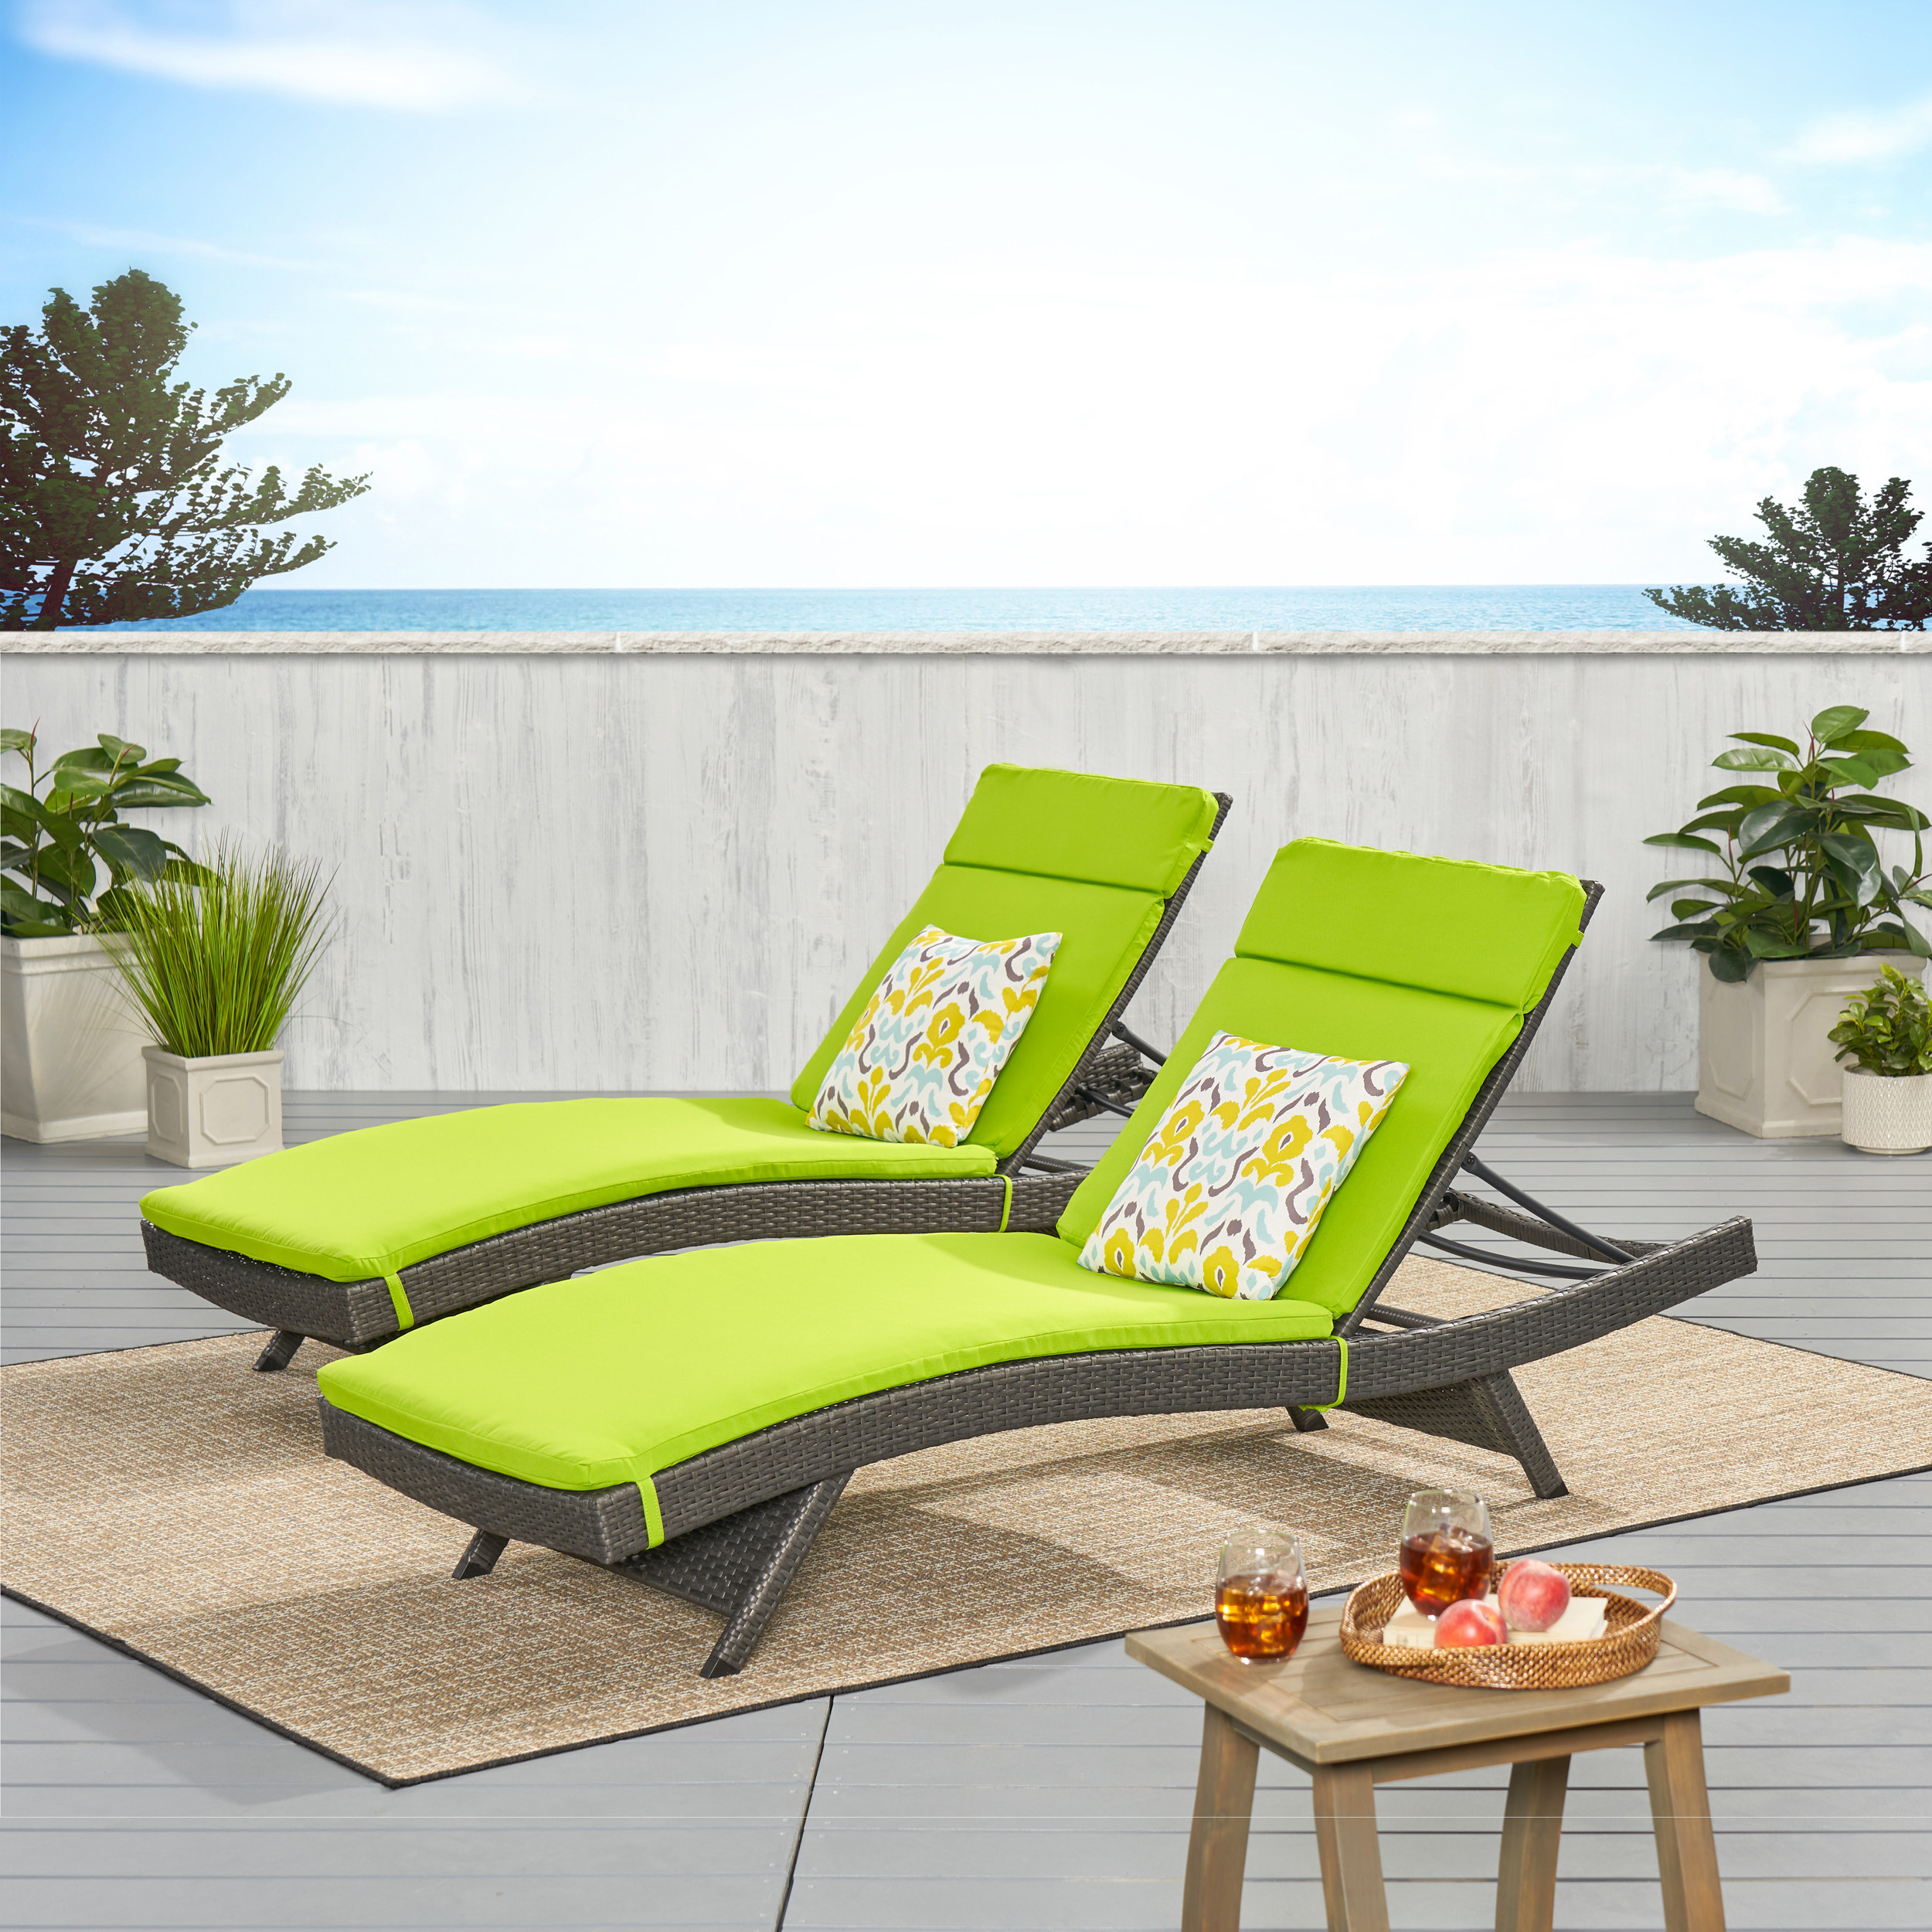 Nassau Outdoor Grey Wicker Adjustable Chaise Lounge With Green Cushion (Set Of 2)